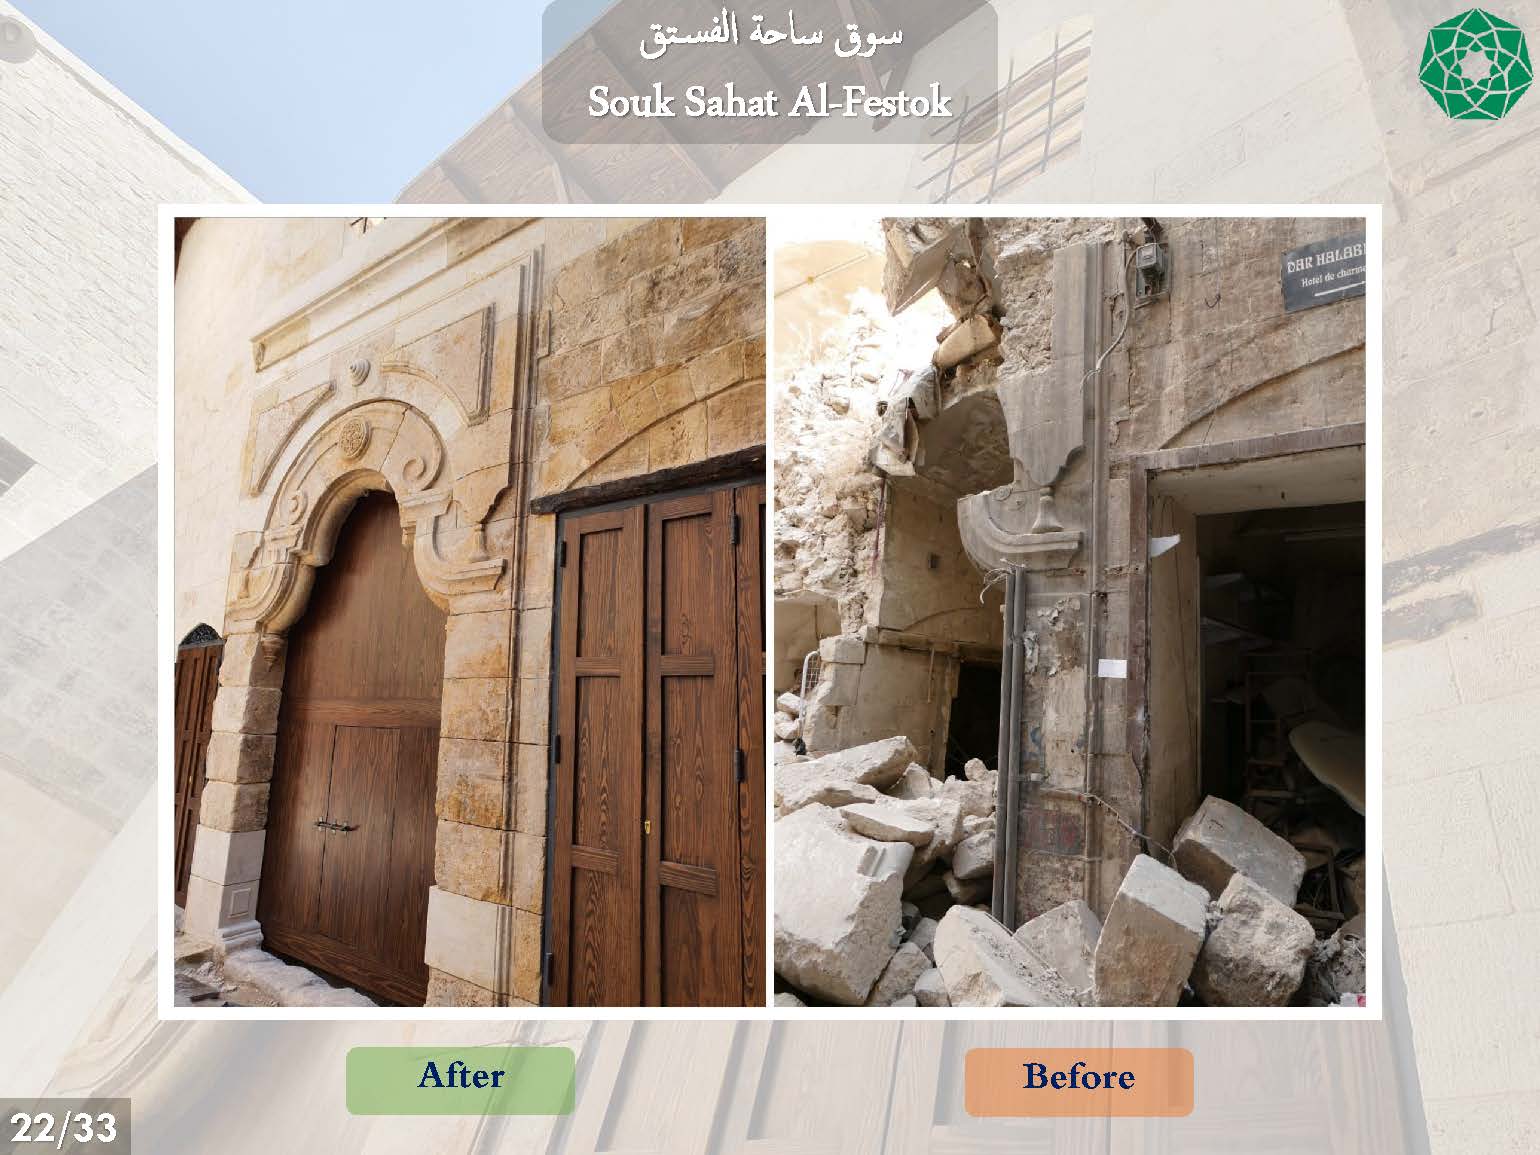 <p>Before and after images showing the extent of the rehabilitation effort</p>